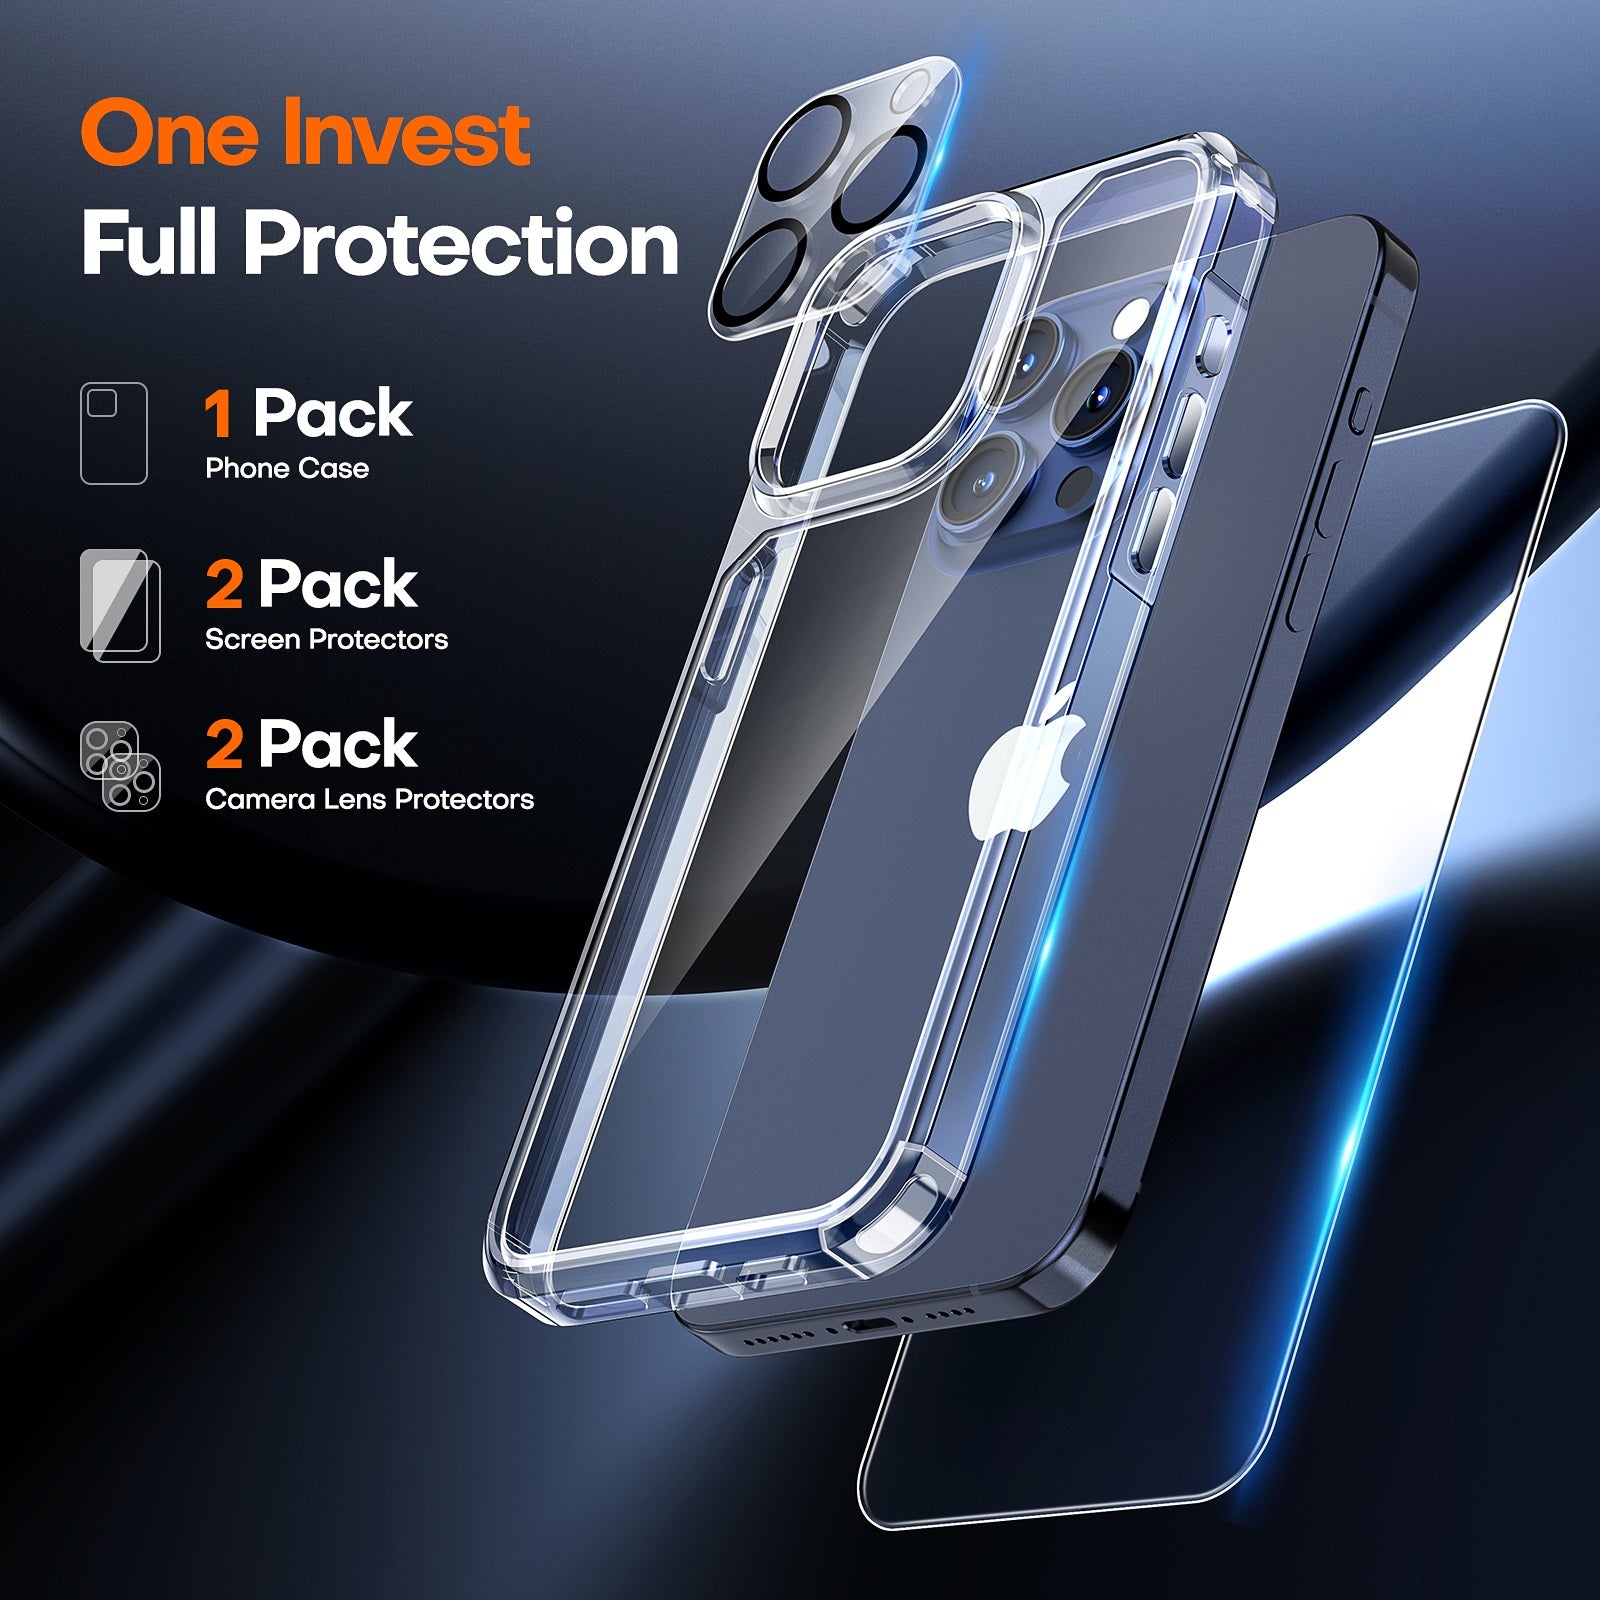 TAURI 5 in 1 for iPhone 15 Pro Max Case Crystal Clear, [Not-Yellowing & Military Drop Defense] with 2X Tempered Glass Screen Protector + 2X Camera Lens Protector, Slim Shockproof Phone Case 6.7 inch